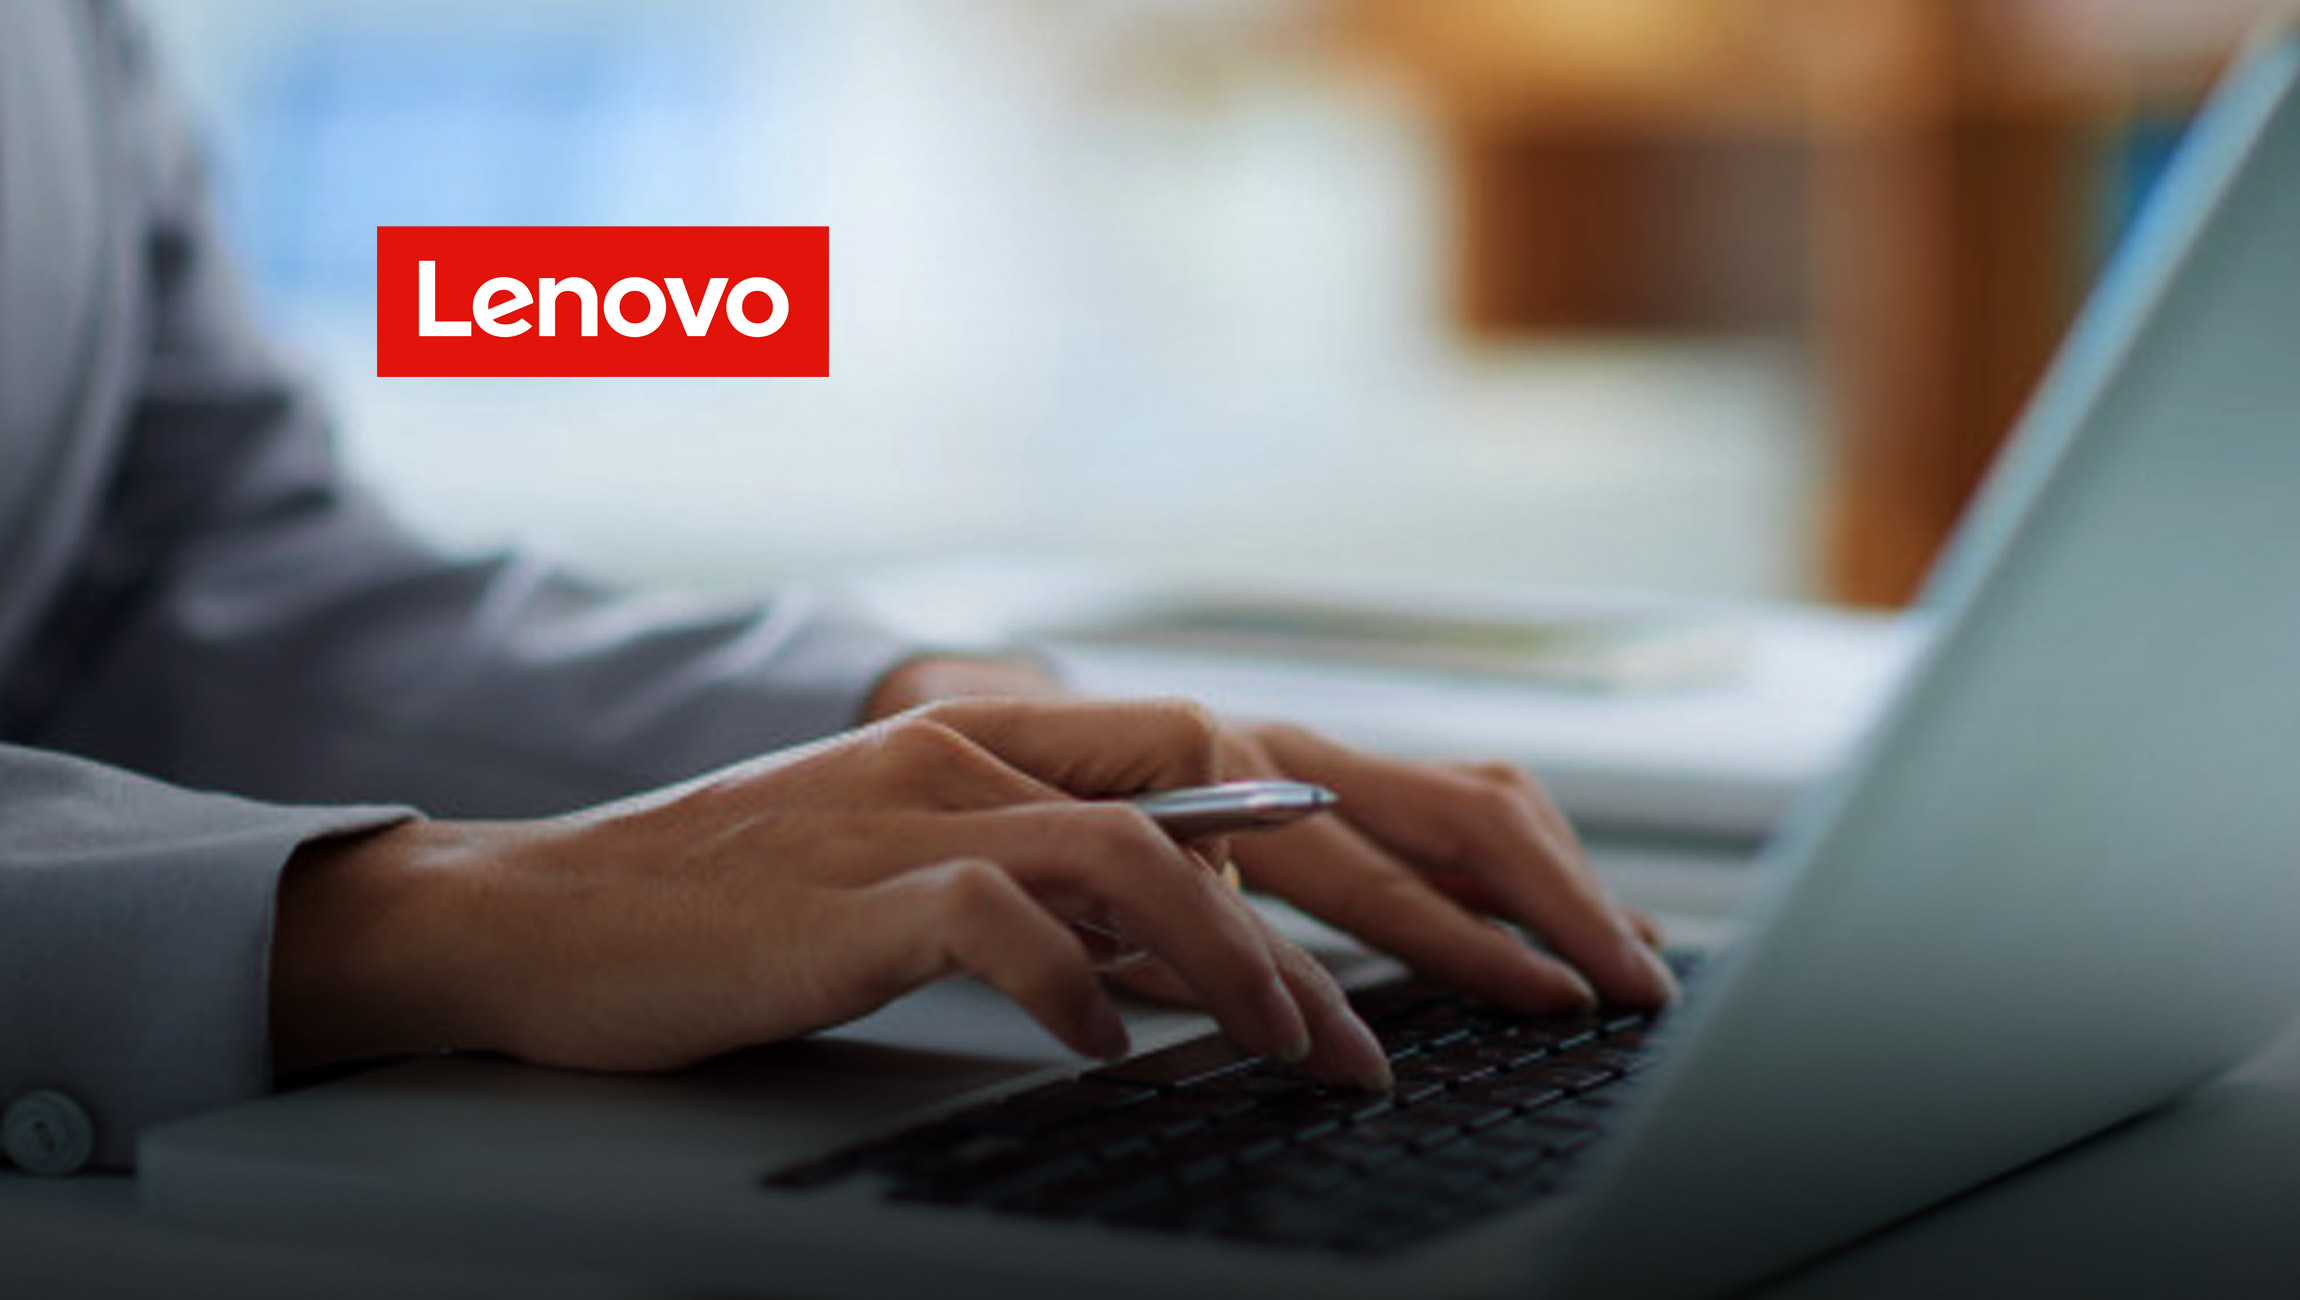 Lenovo Study: More Than Two Thirds of UK CIOS Would Replace Half or More of Their Current Technology If Given Opportunity